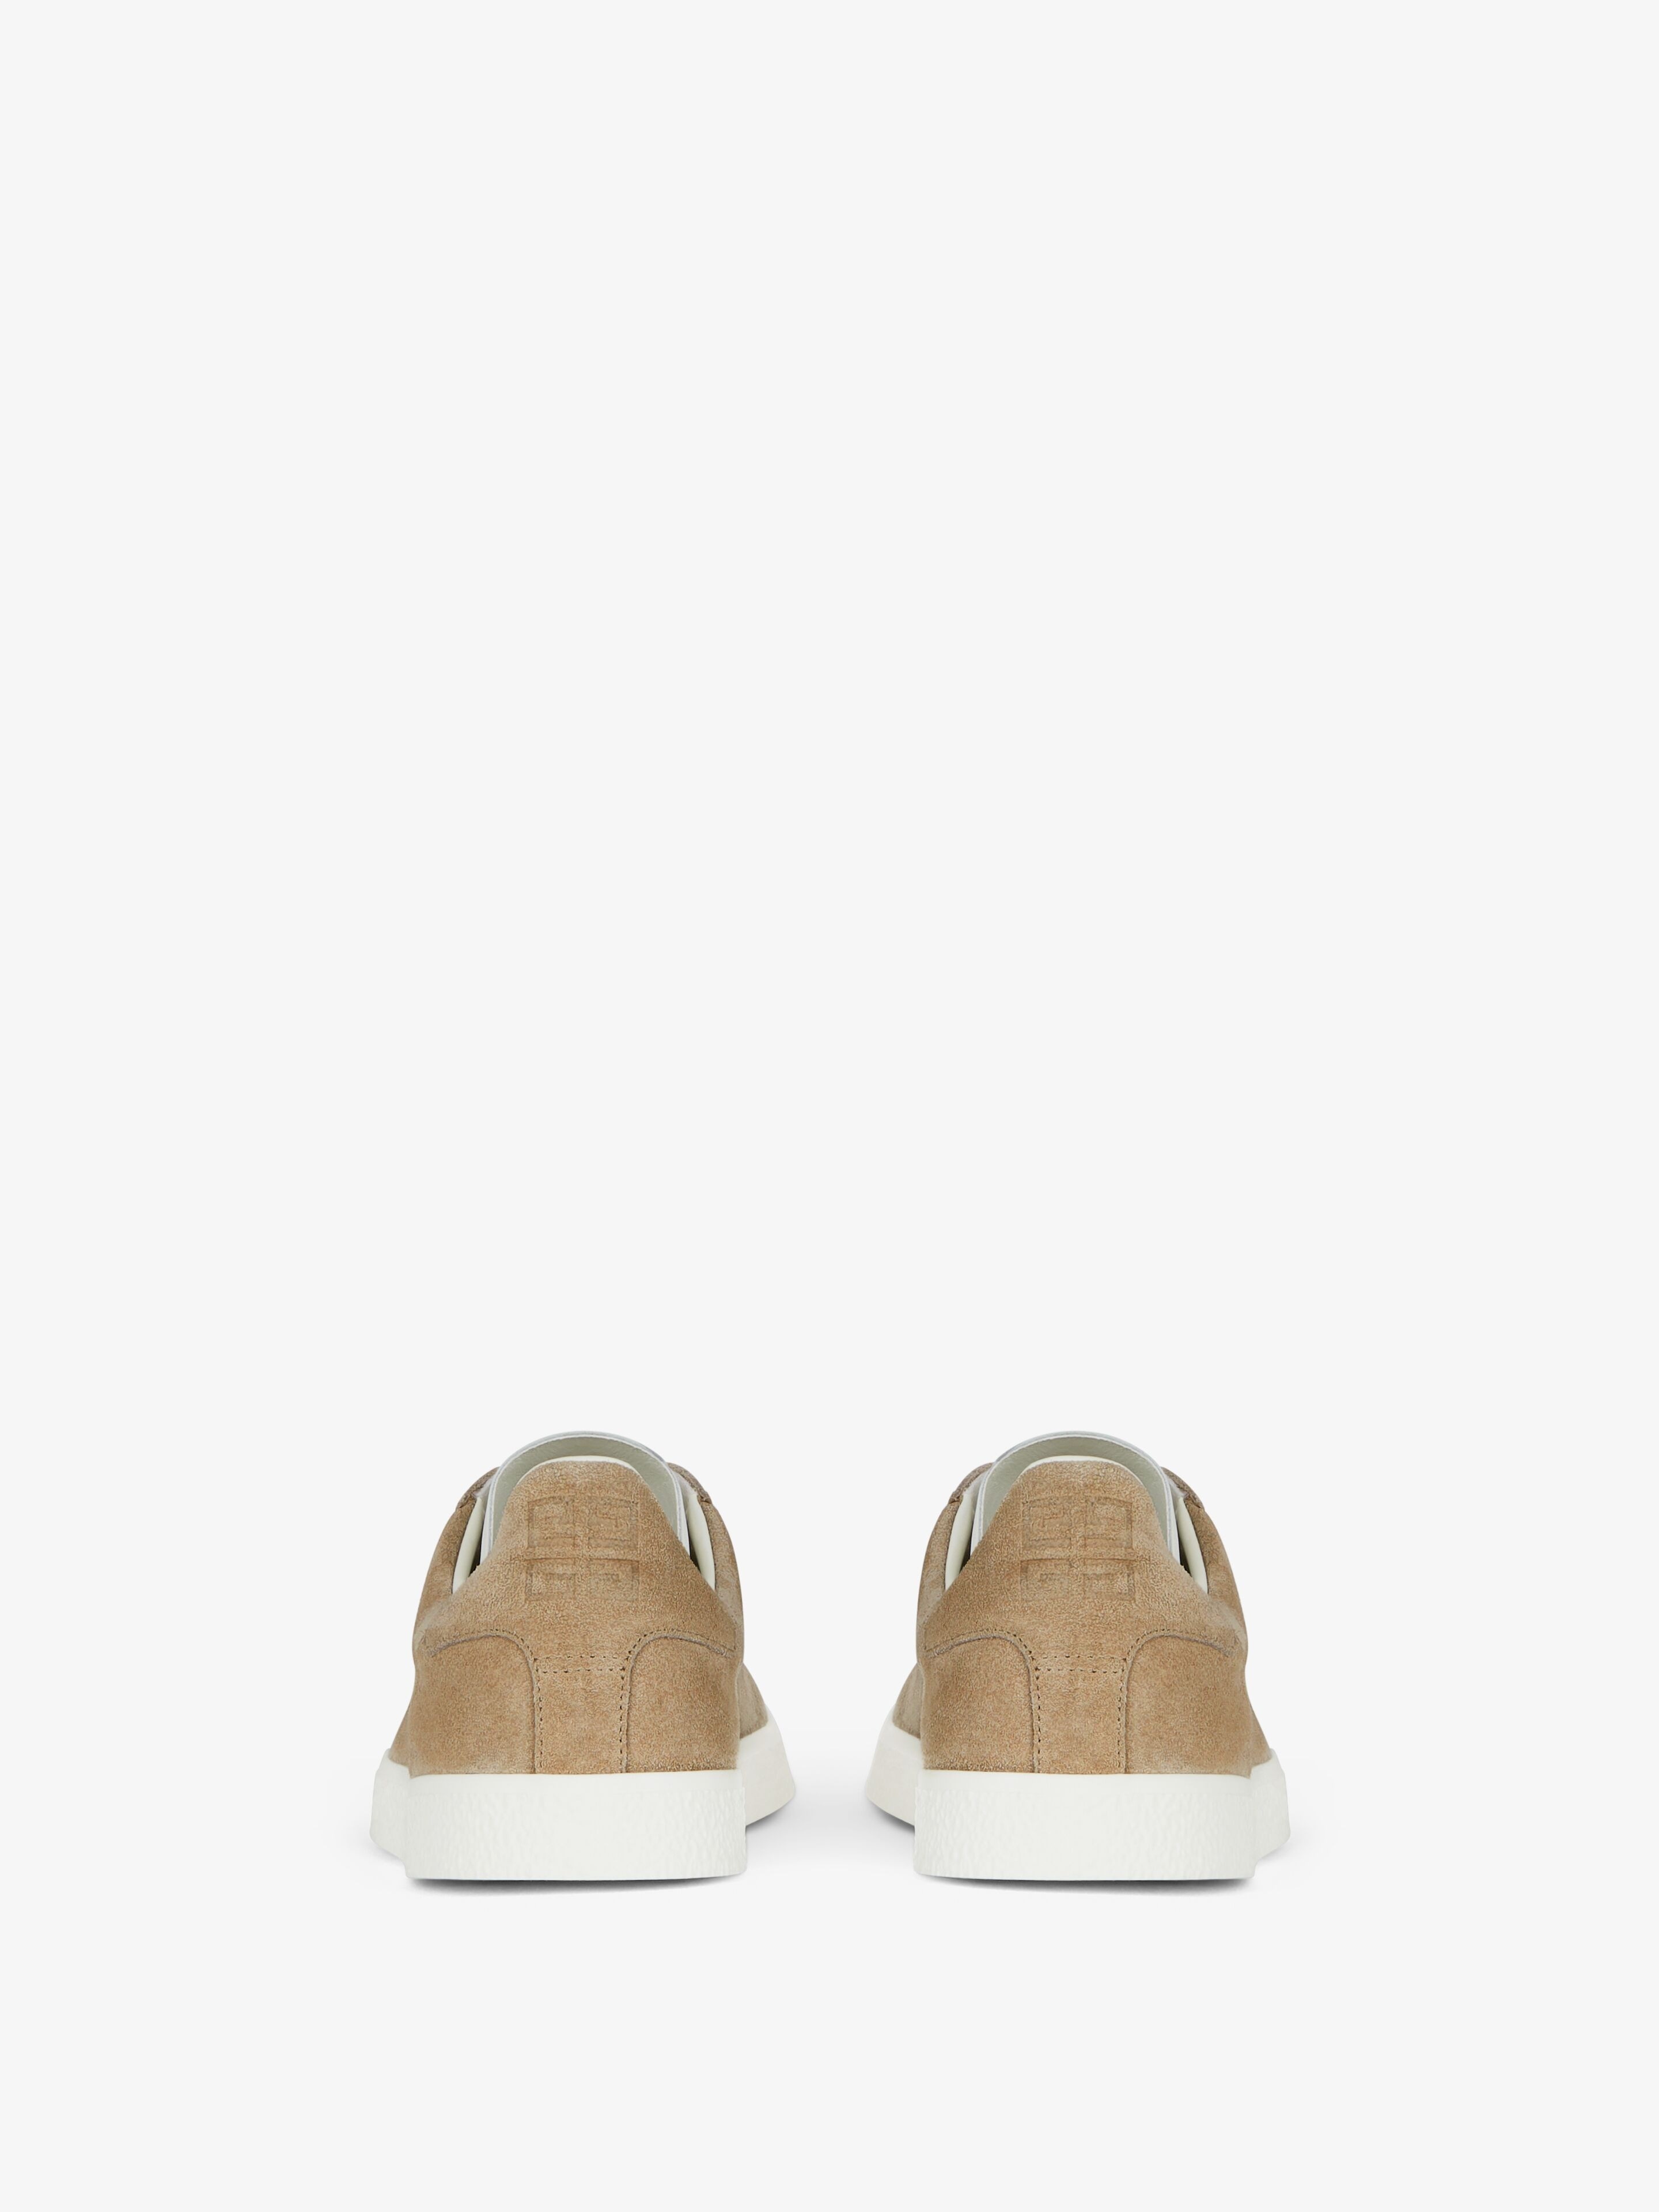 TOWN SNEAKERS IN SUEDE - 7